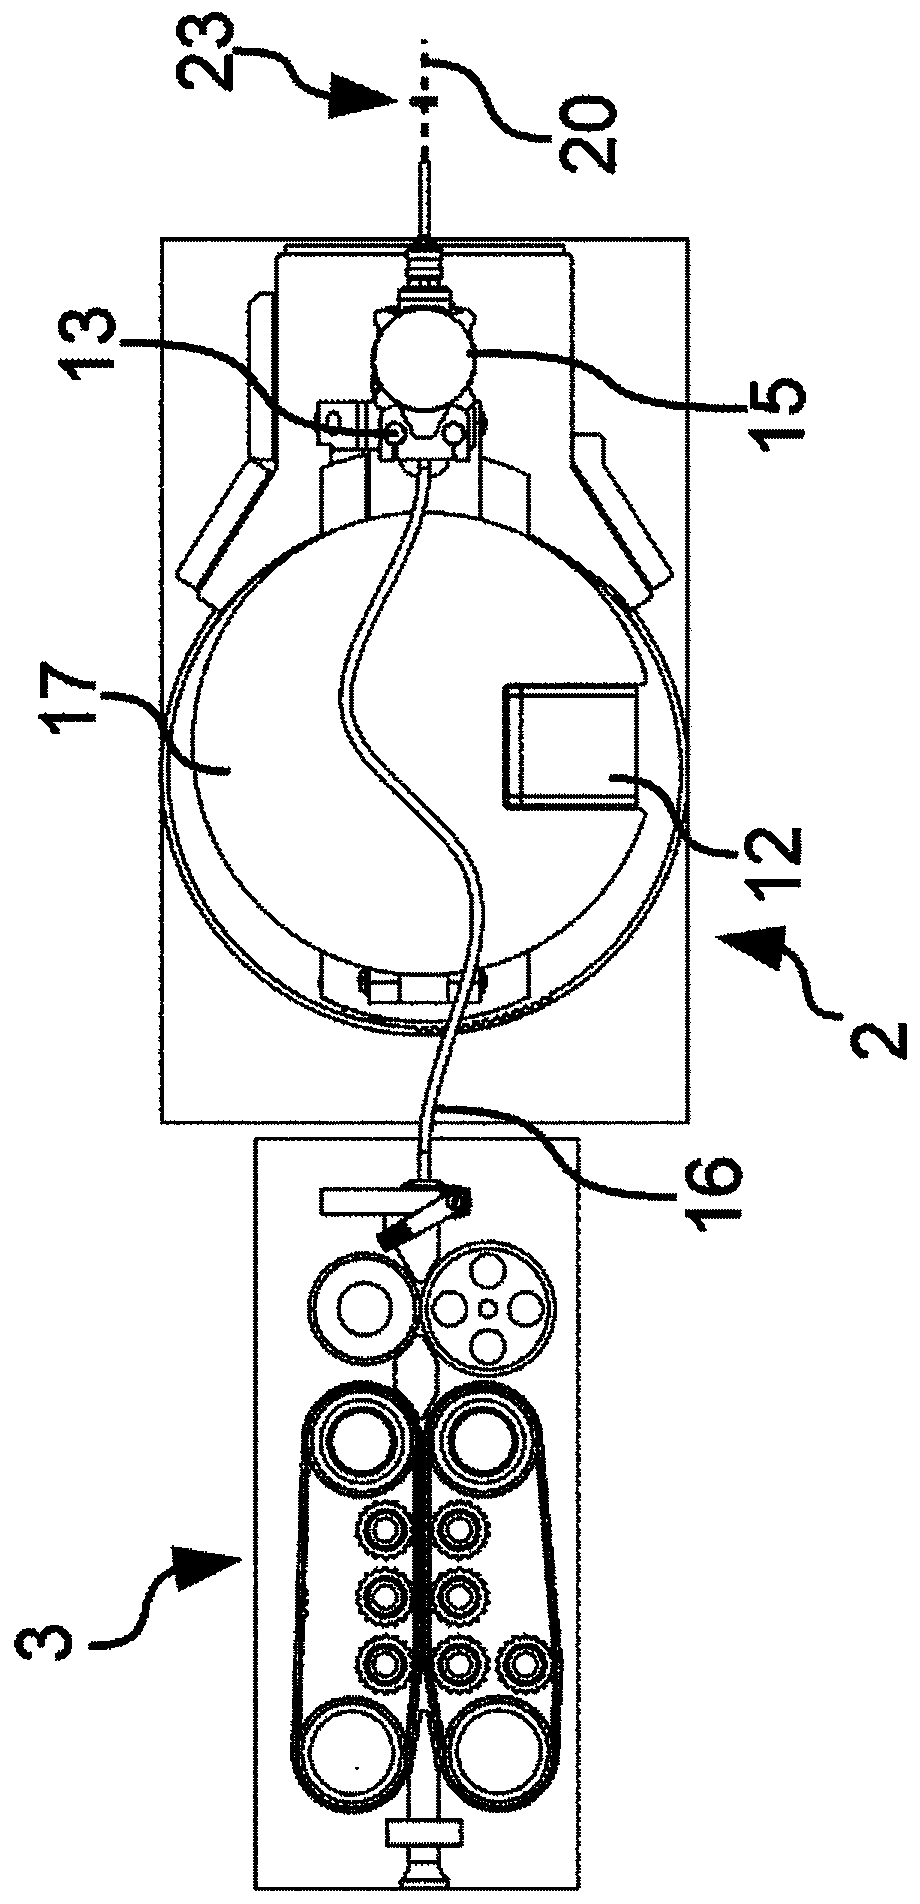 Cable end holding device for holding cable end, method for positioning cable end of cable, and cable bundling machine